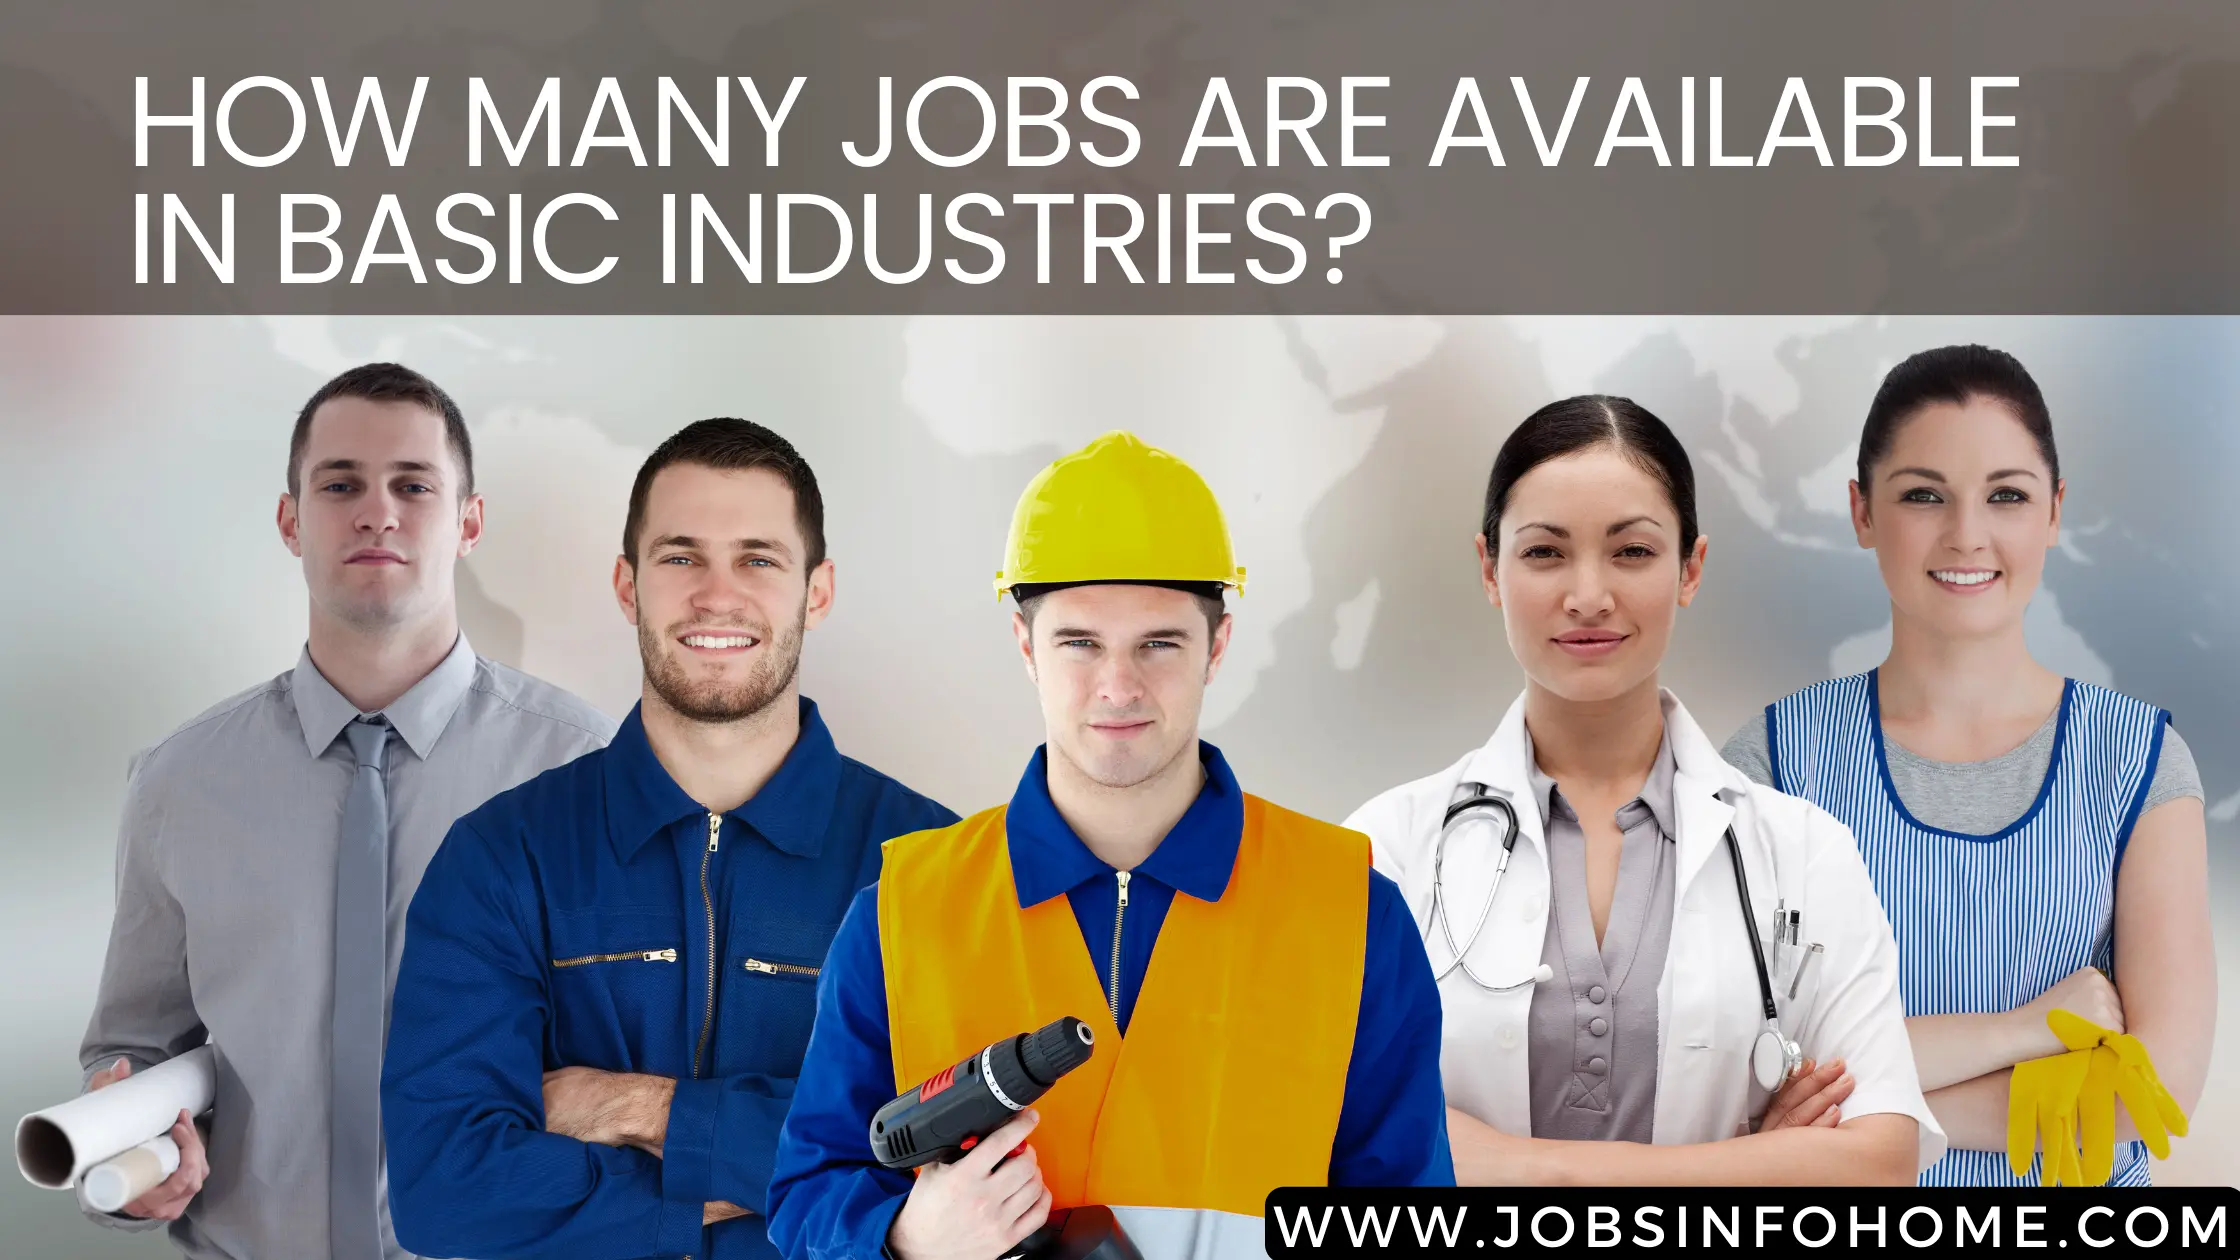 How Many Jobs Are Available in Basic Industries?